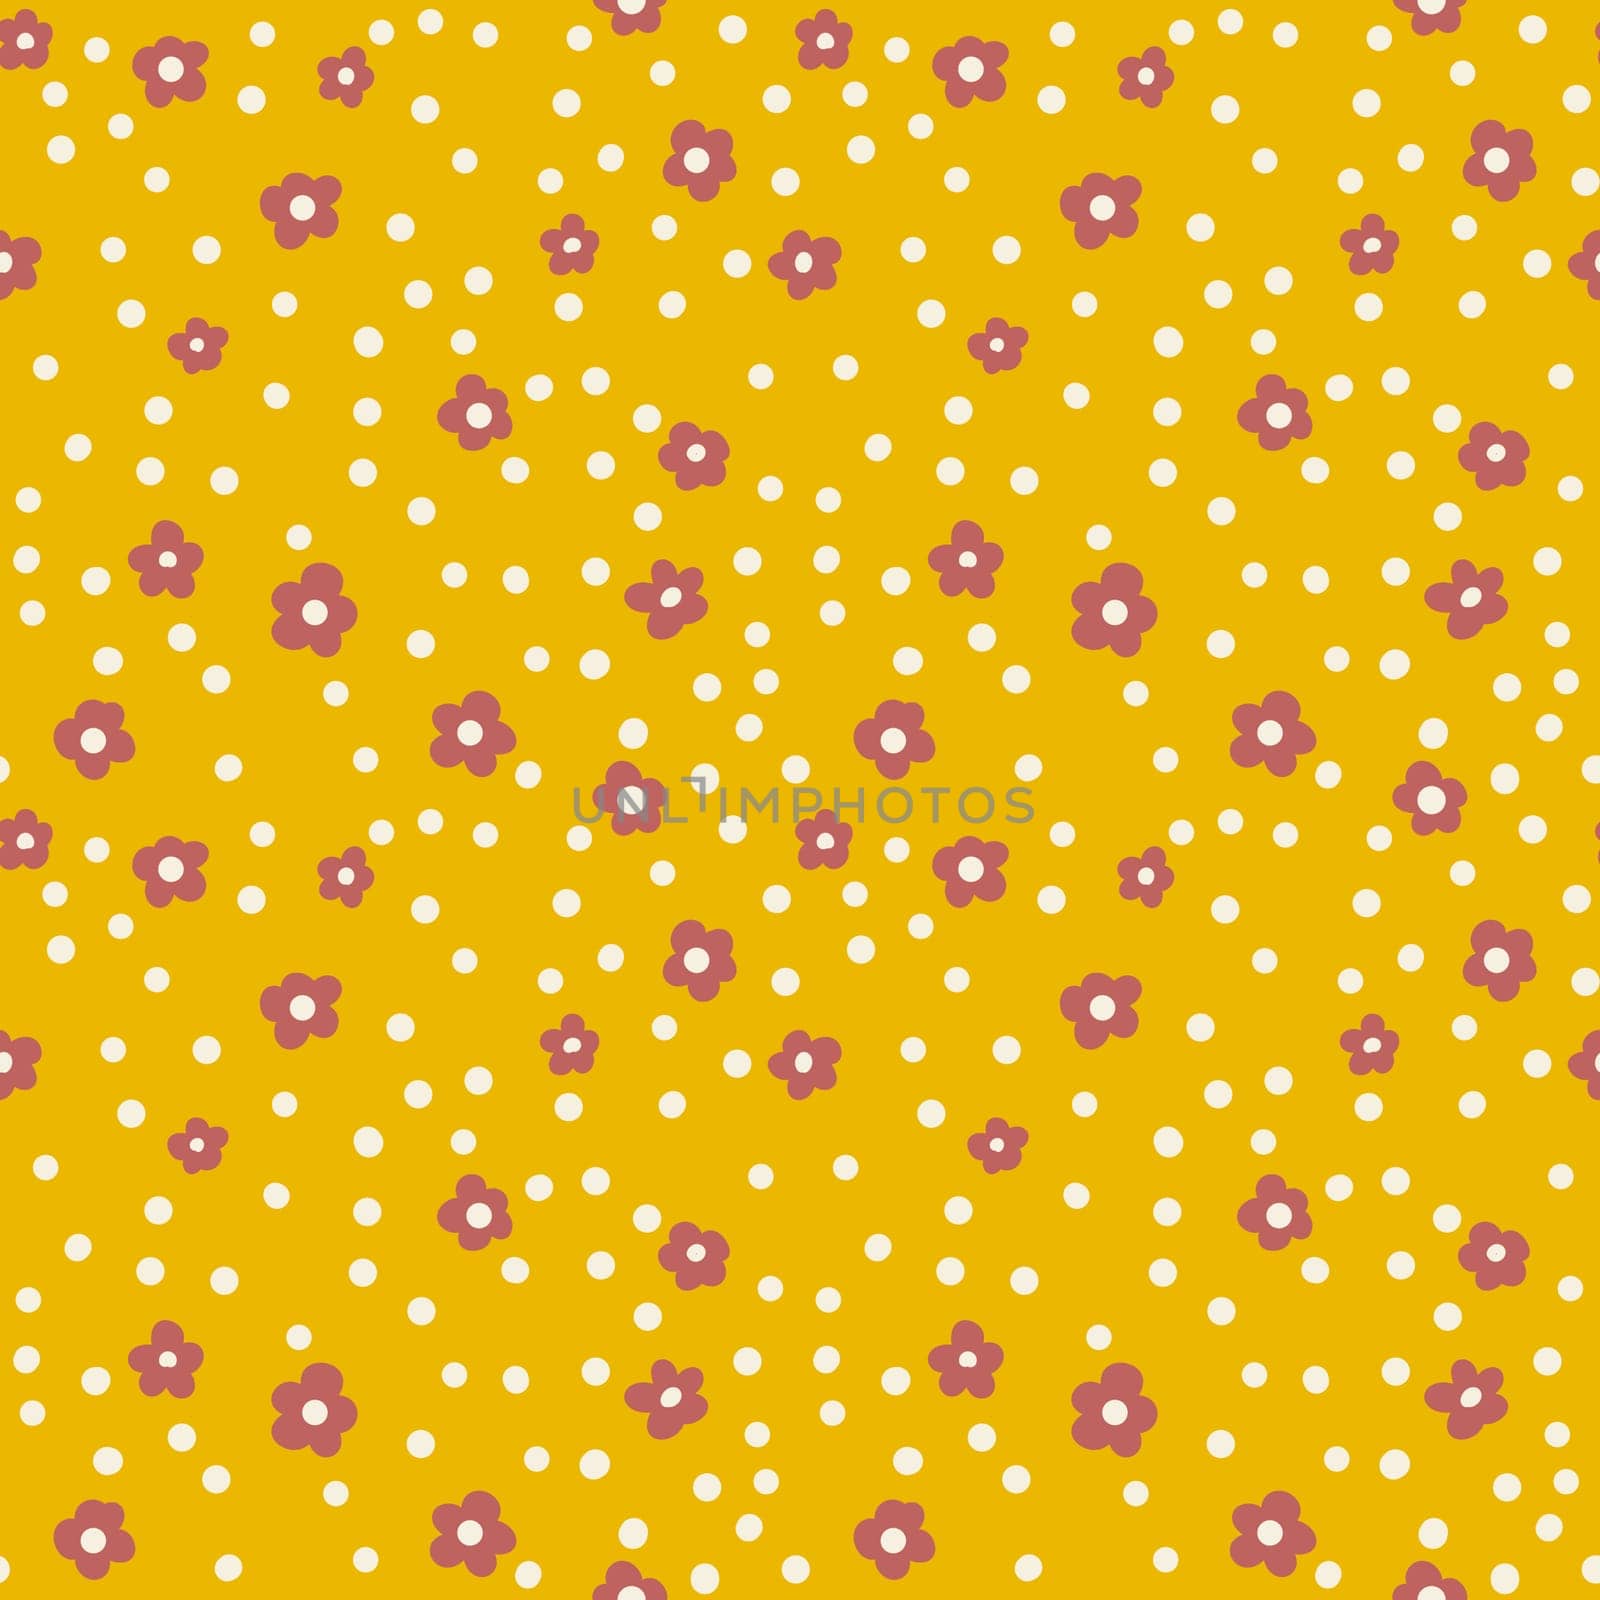 Hand drawn seamless pattern with small ditsy red flowers on yellow background white polka dot. Retro vintage floral design, tiny bloom blossom, mid century boho textile